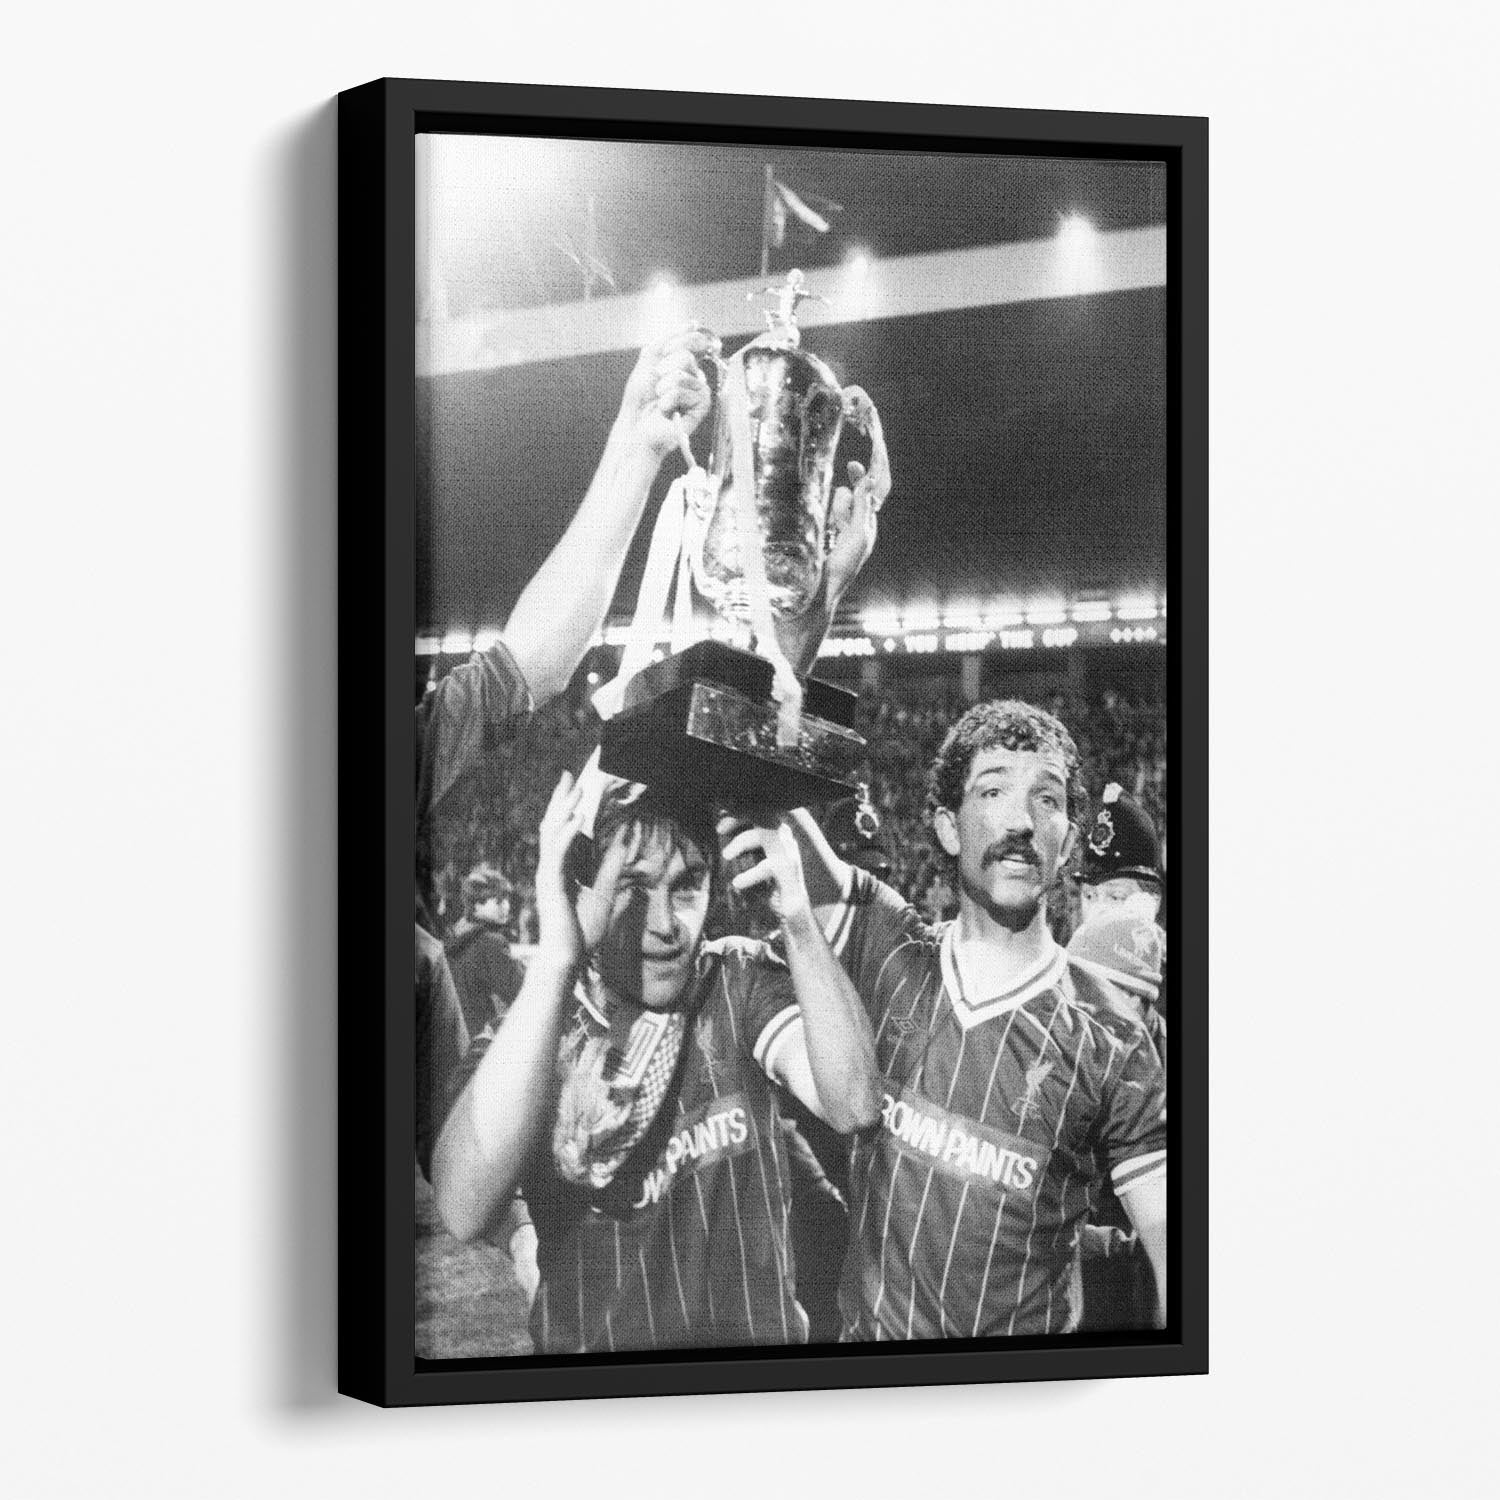 Kenny Dalglish and Graeme Souness with the Milk Cup trophy Floating Framed Canvas - Canvas Art Rocks - 1